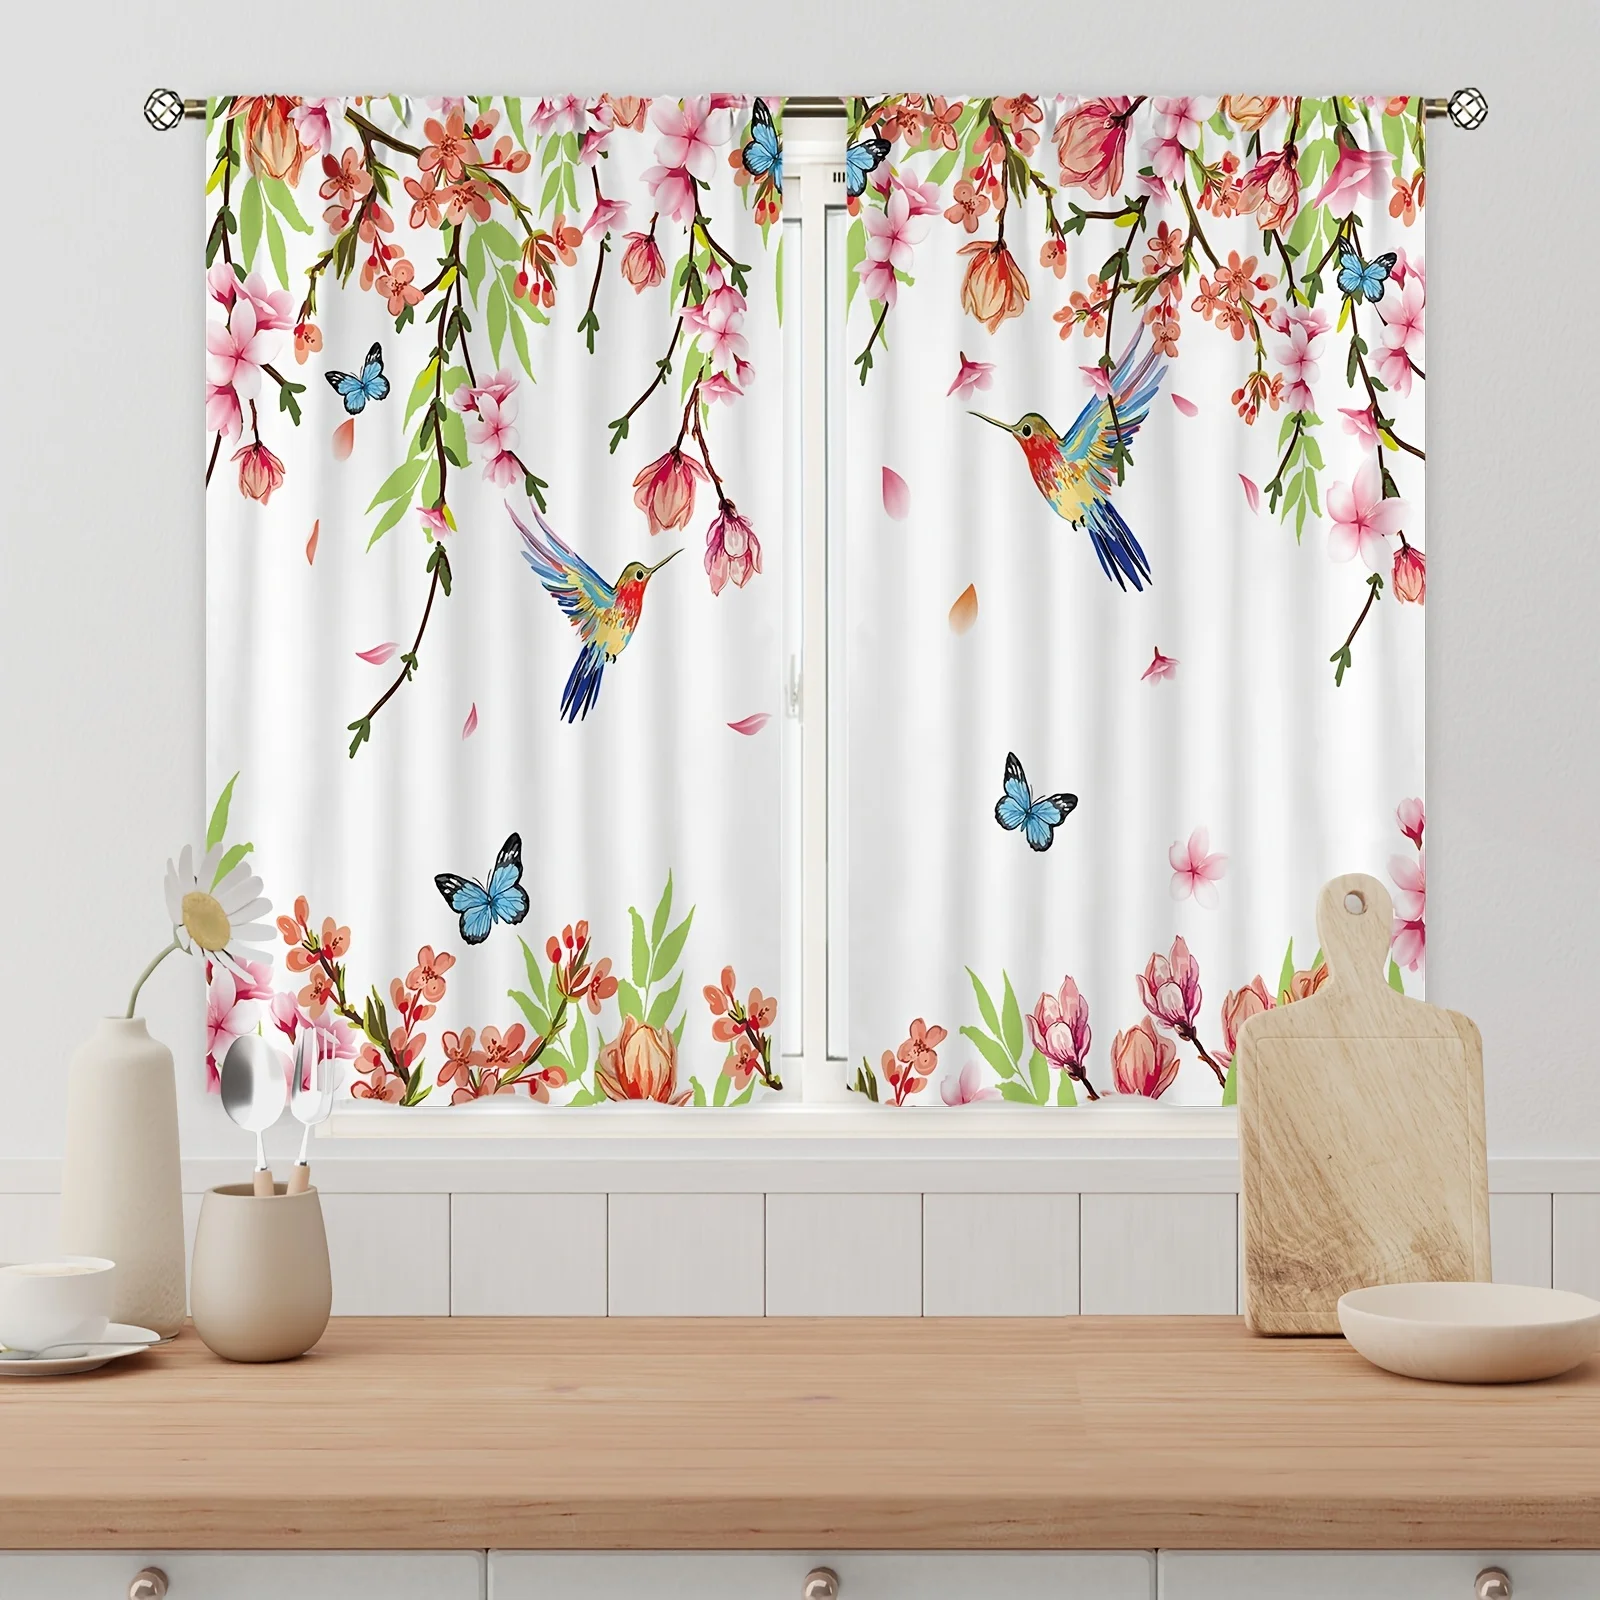 

2pcs Rod Pocket Hummingbird Floral Kitchen Curtains Flower Butterfly Botanical Bedroom Rustic Window for Living Room Home Decor